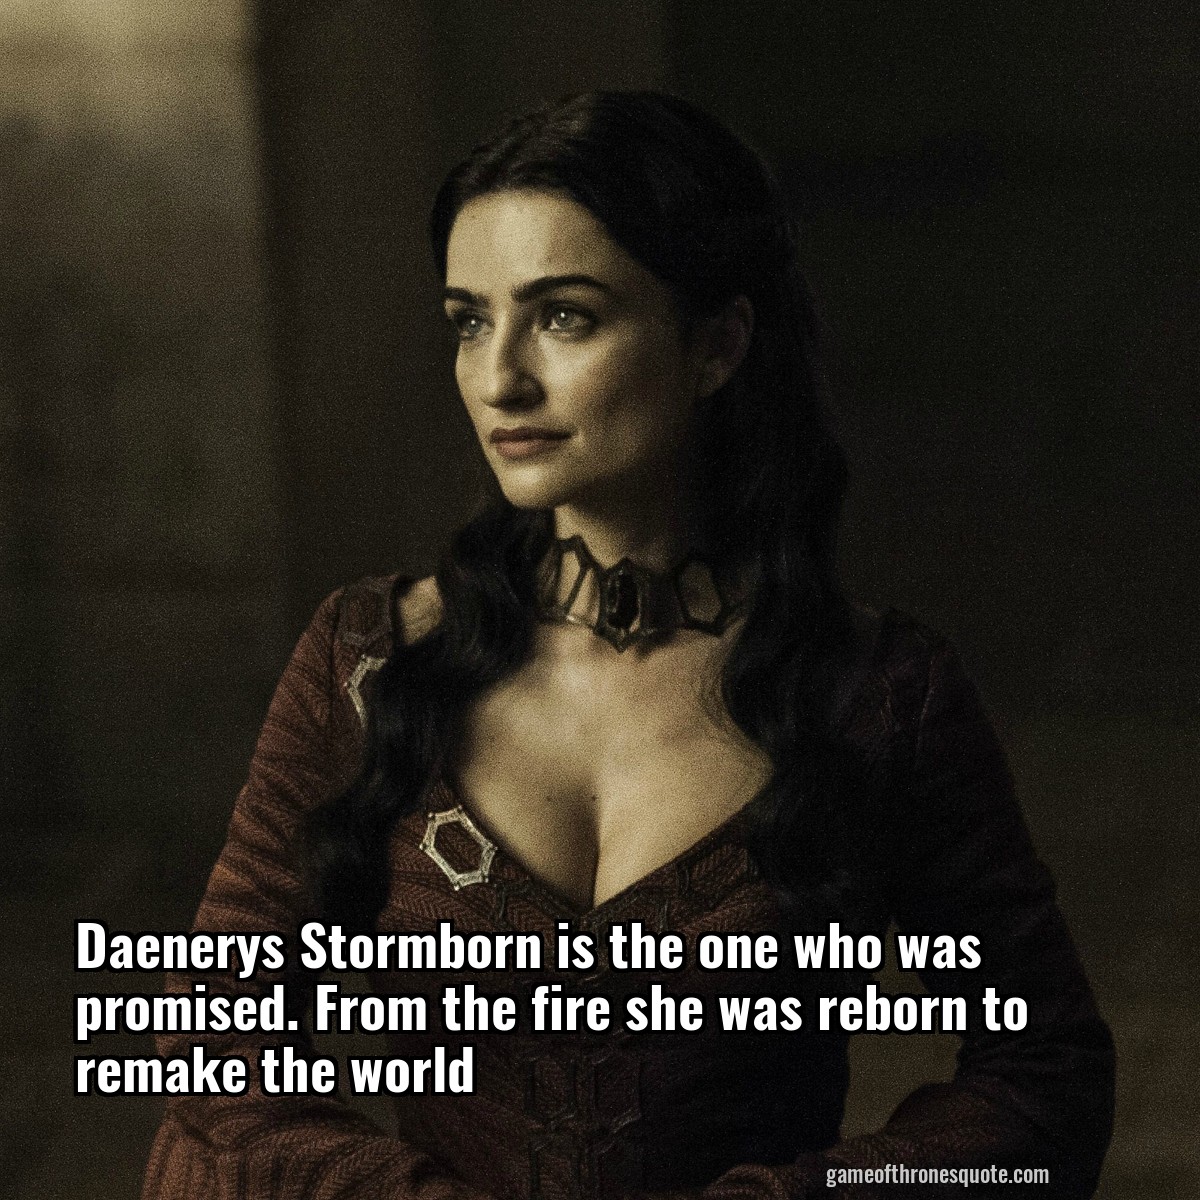 Daenerys Stormborn is the one who was promised. From the fire she was reborn to remake the world